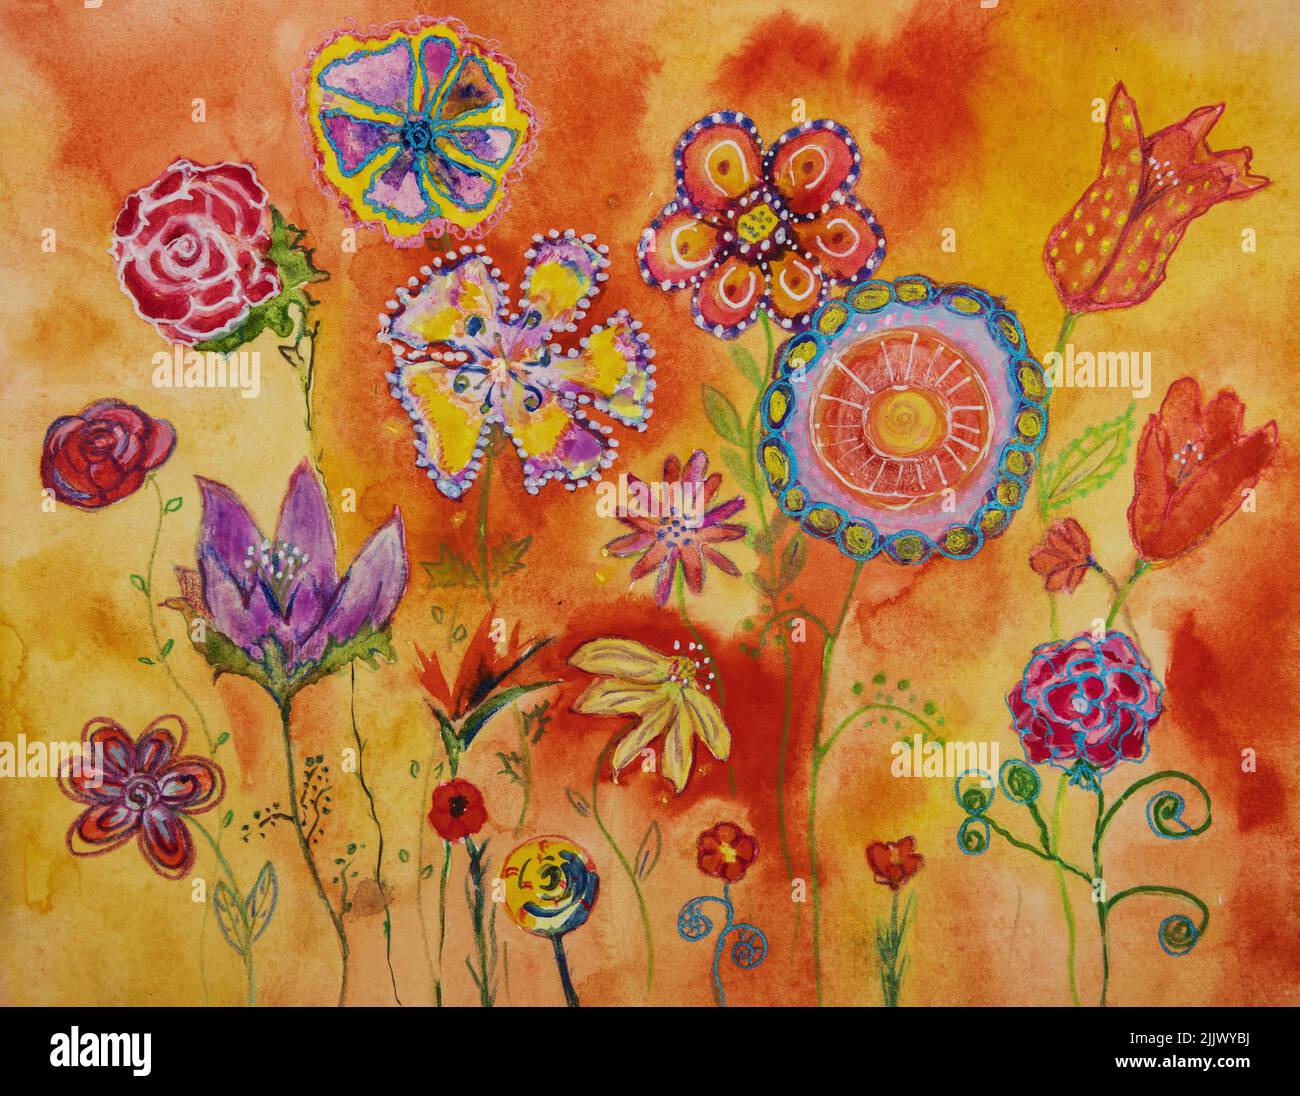 Vibrant whimsical flowers. The dabbing technique near the edges gives a soft focus effect due to the altered surface roughness of the paper. Stock Photo